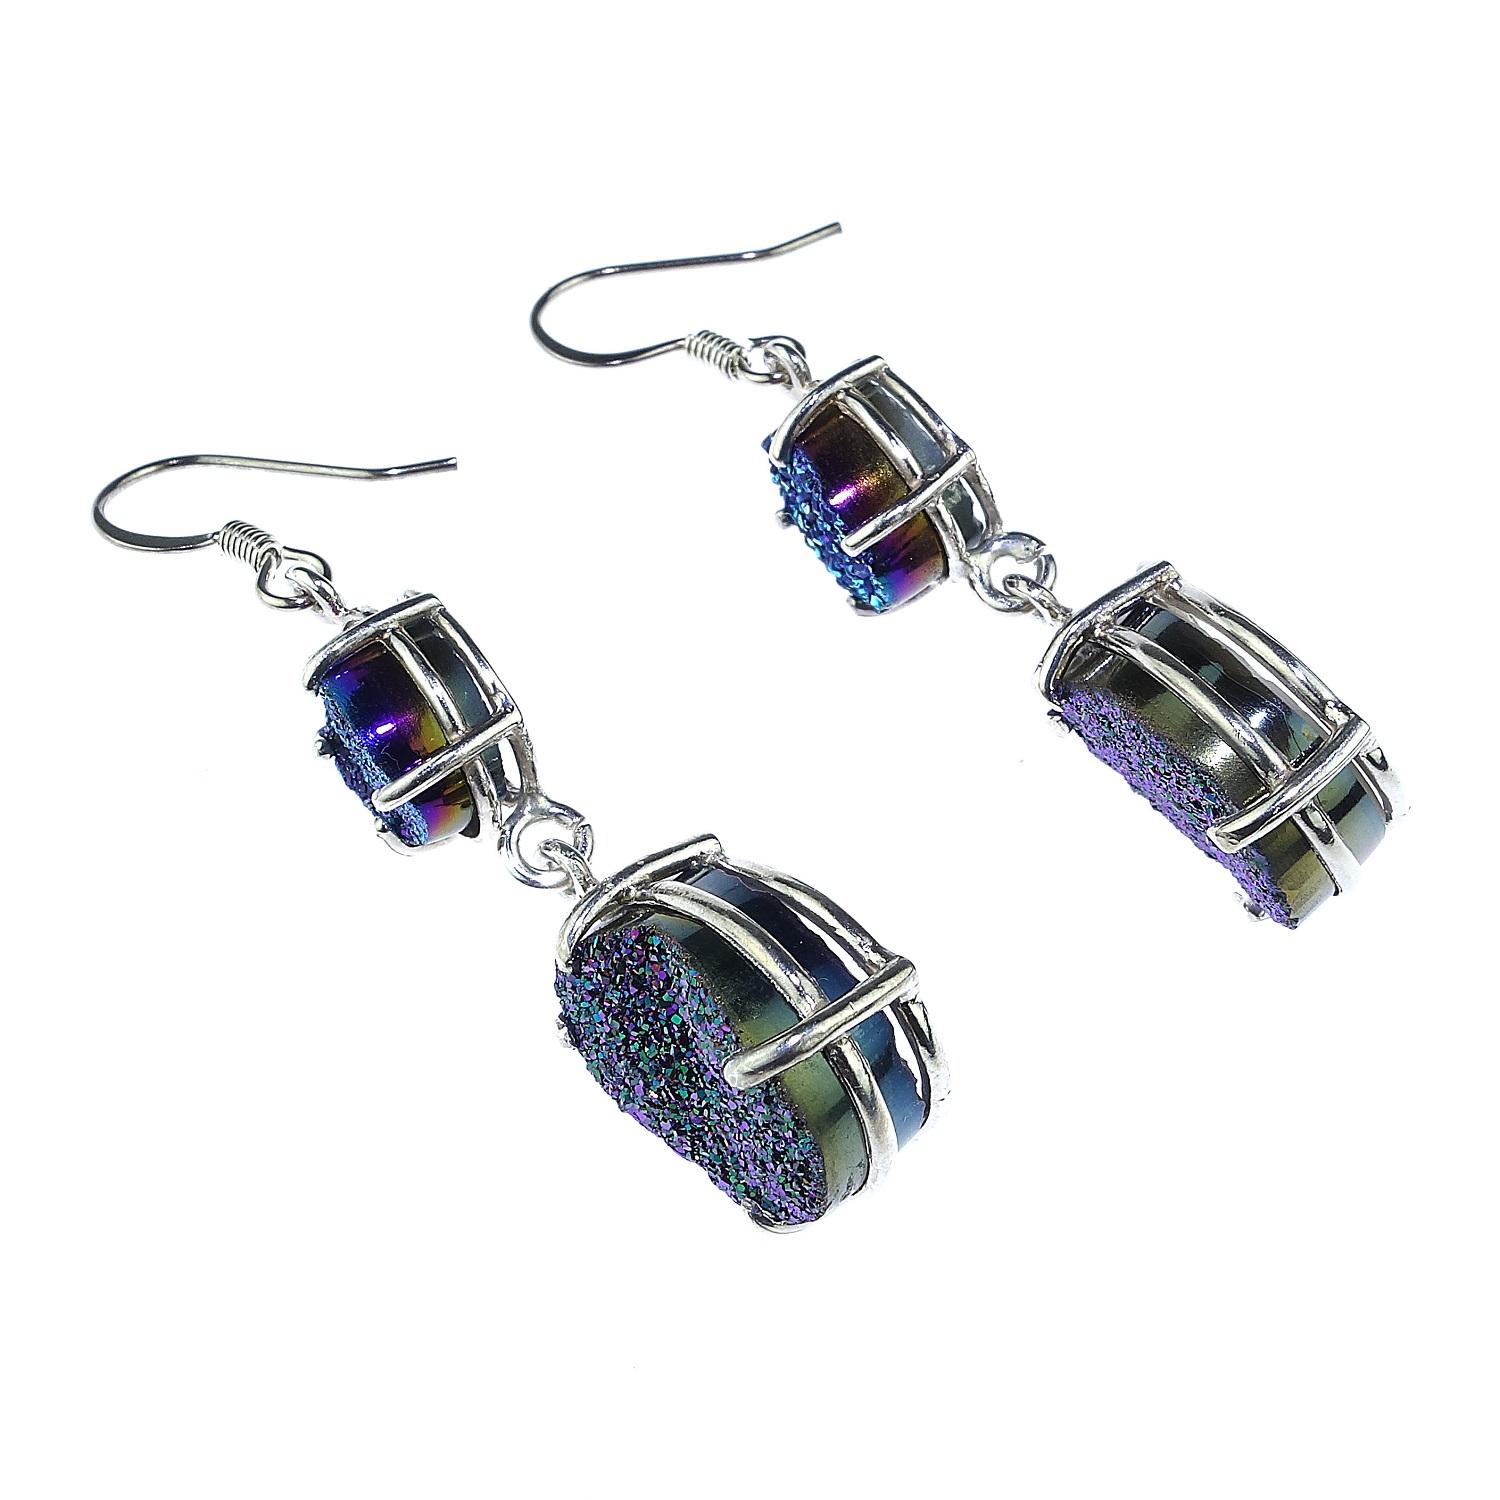 Bead AJD Sparkly Teal and Purple Druzy Dangle Earrings 